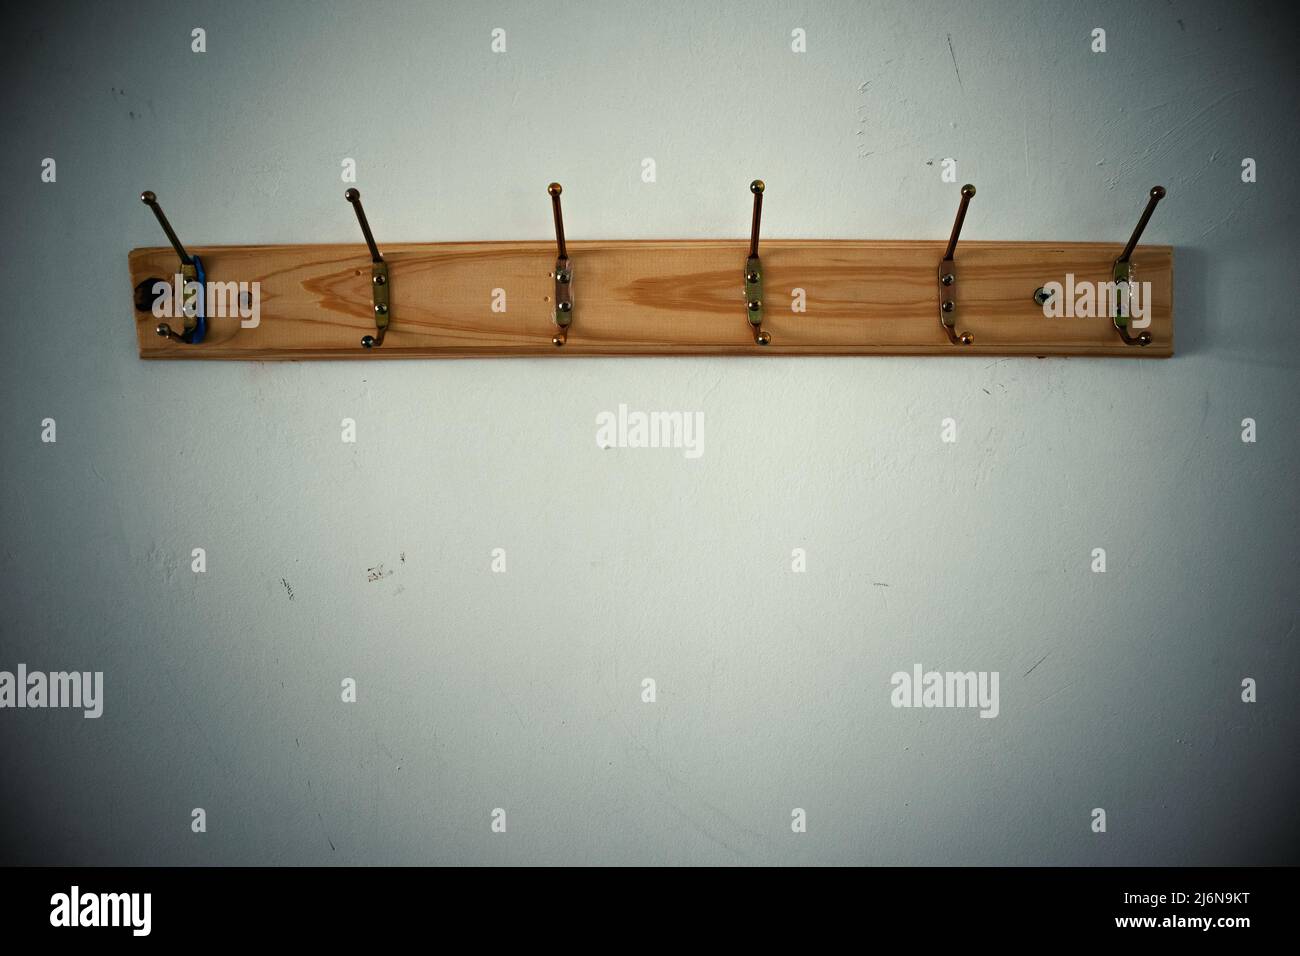 Wooden frame with old metal hangers on the wall, empty space below. Stock Photo